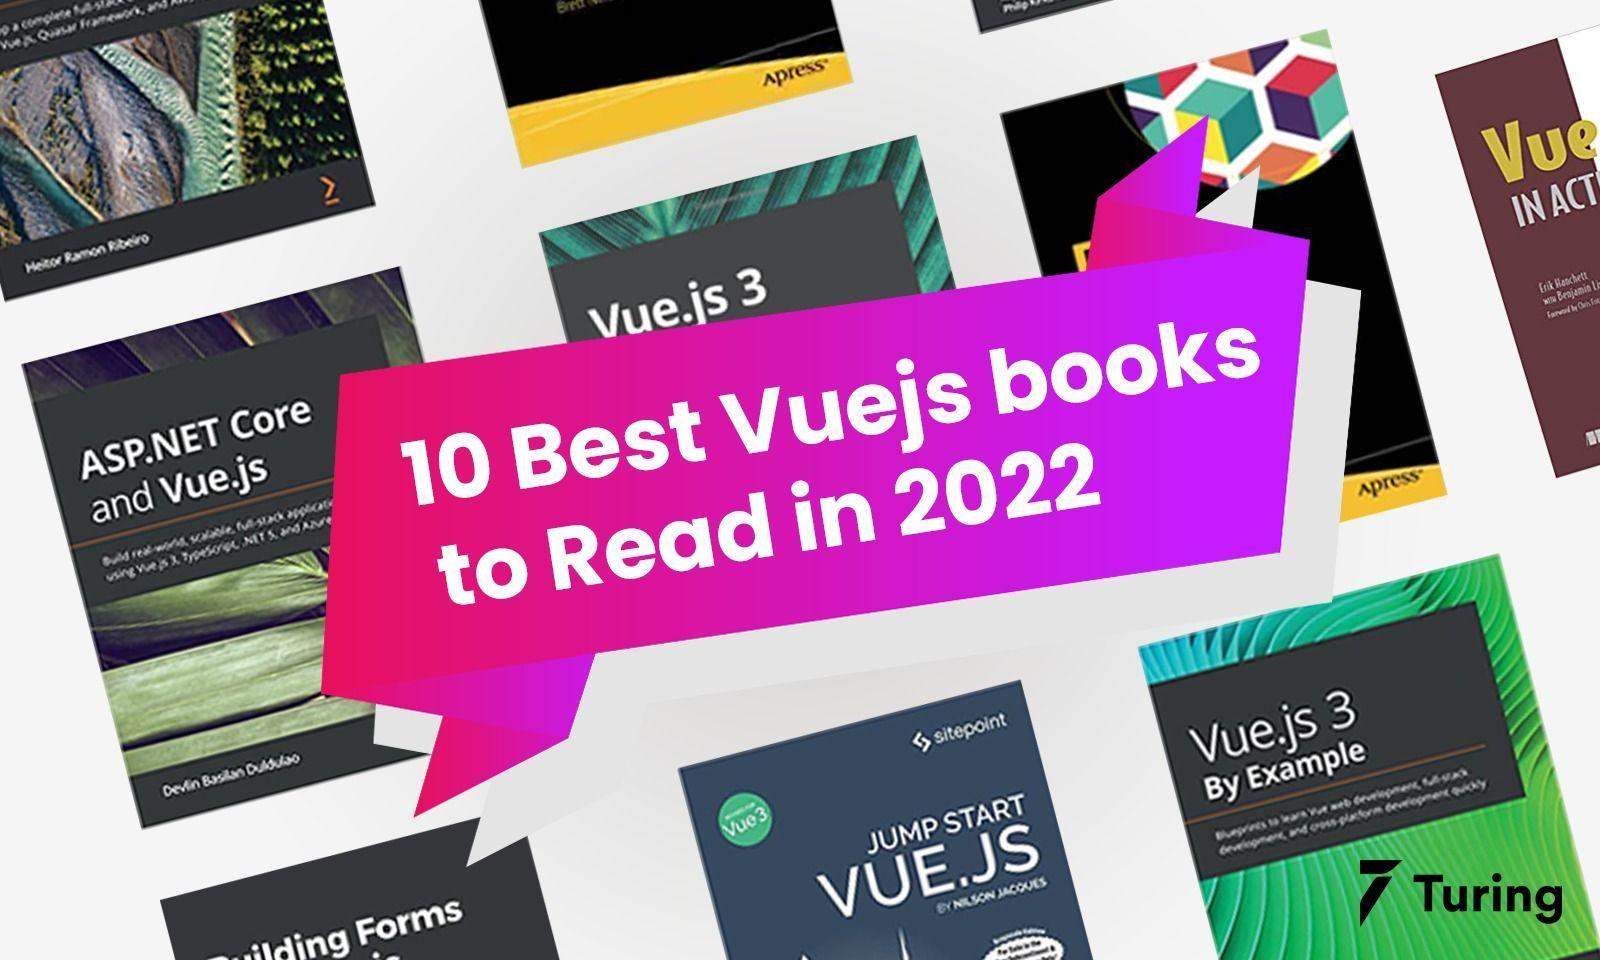 Best Vue.js books to read in 2022